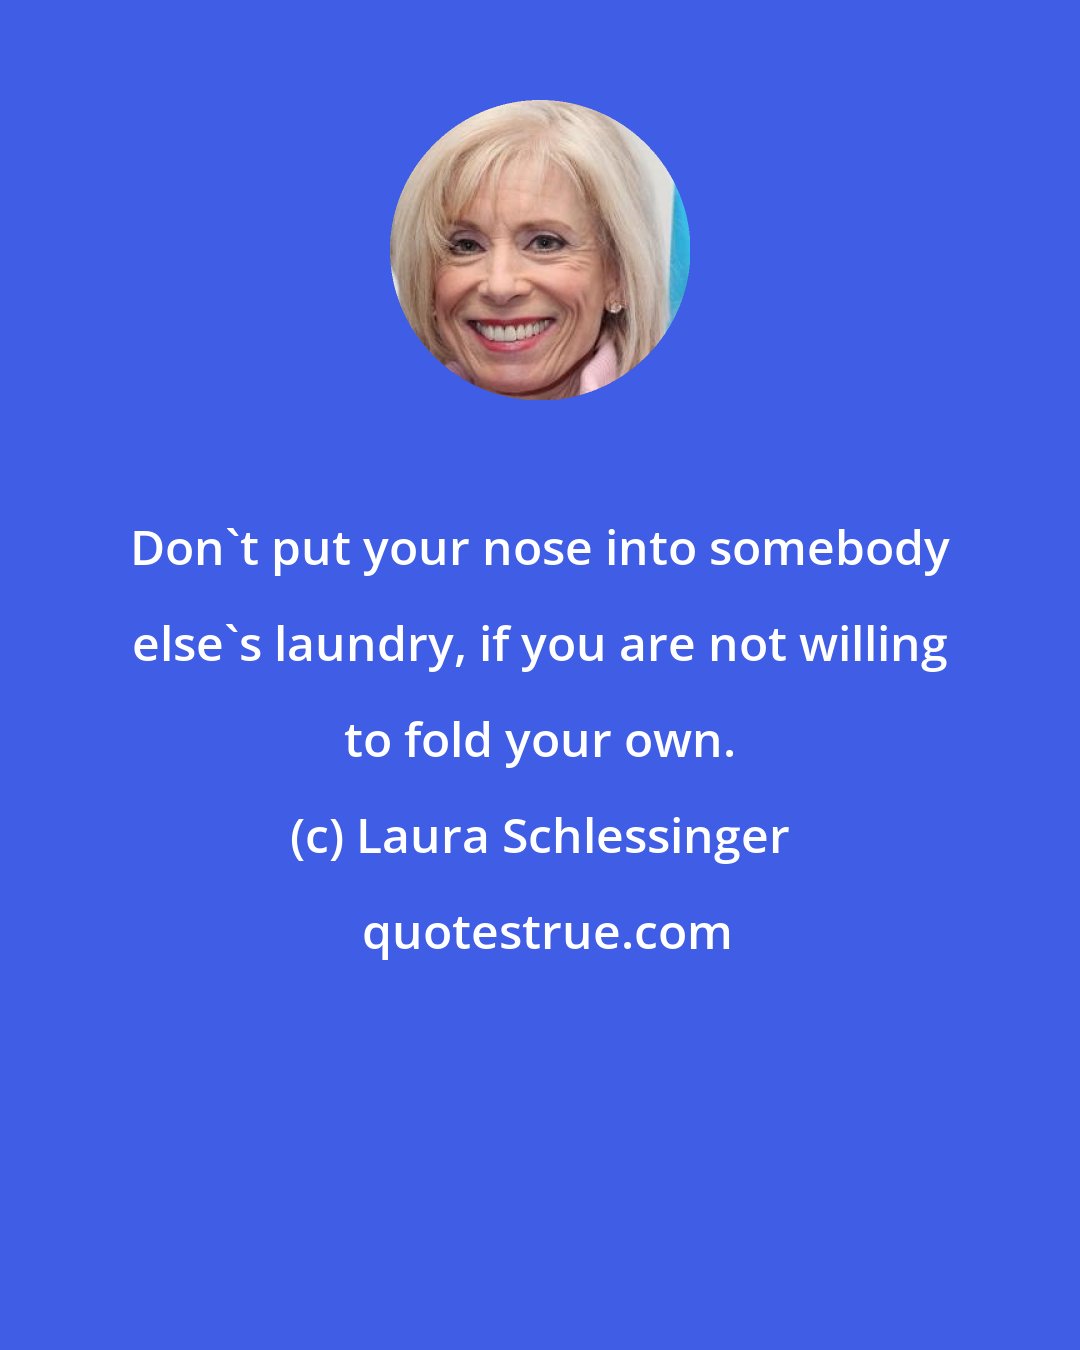 Laura Schlessinger: Don't put your nose into somebody else's laundry, if you are not willing to fold your own.